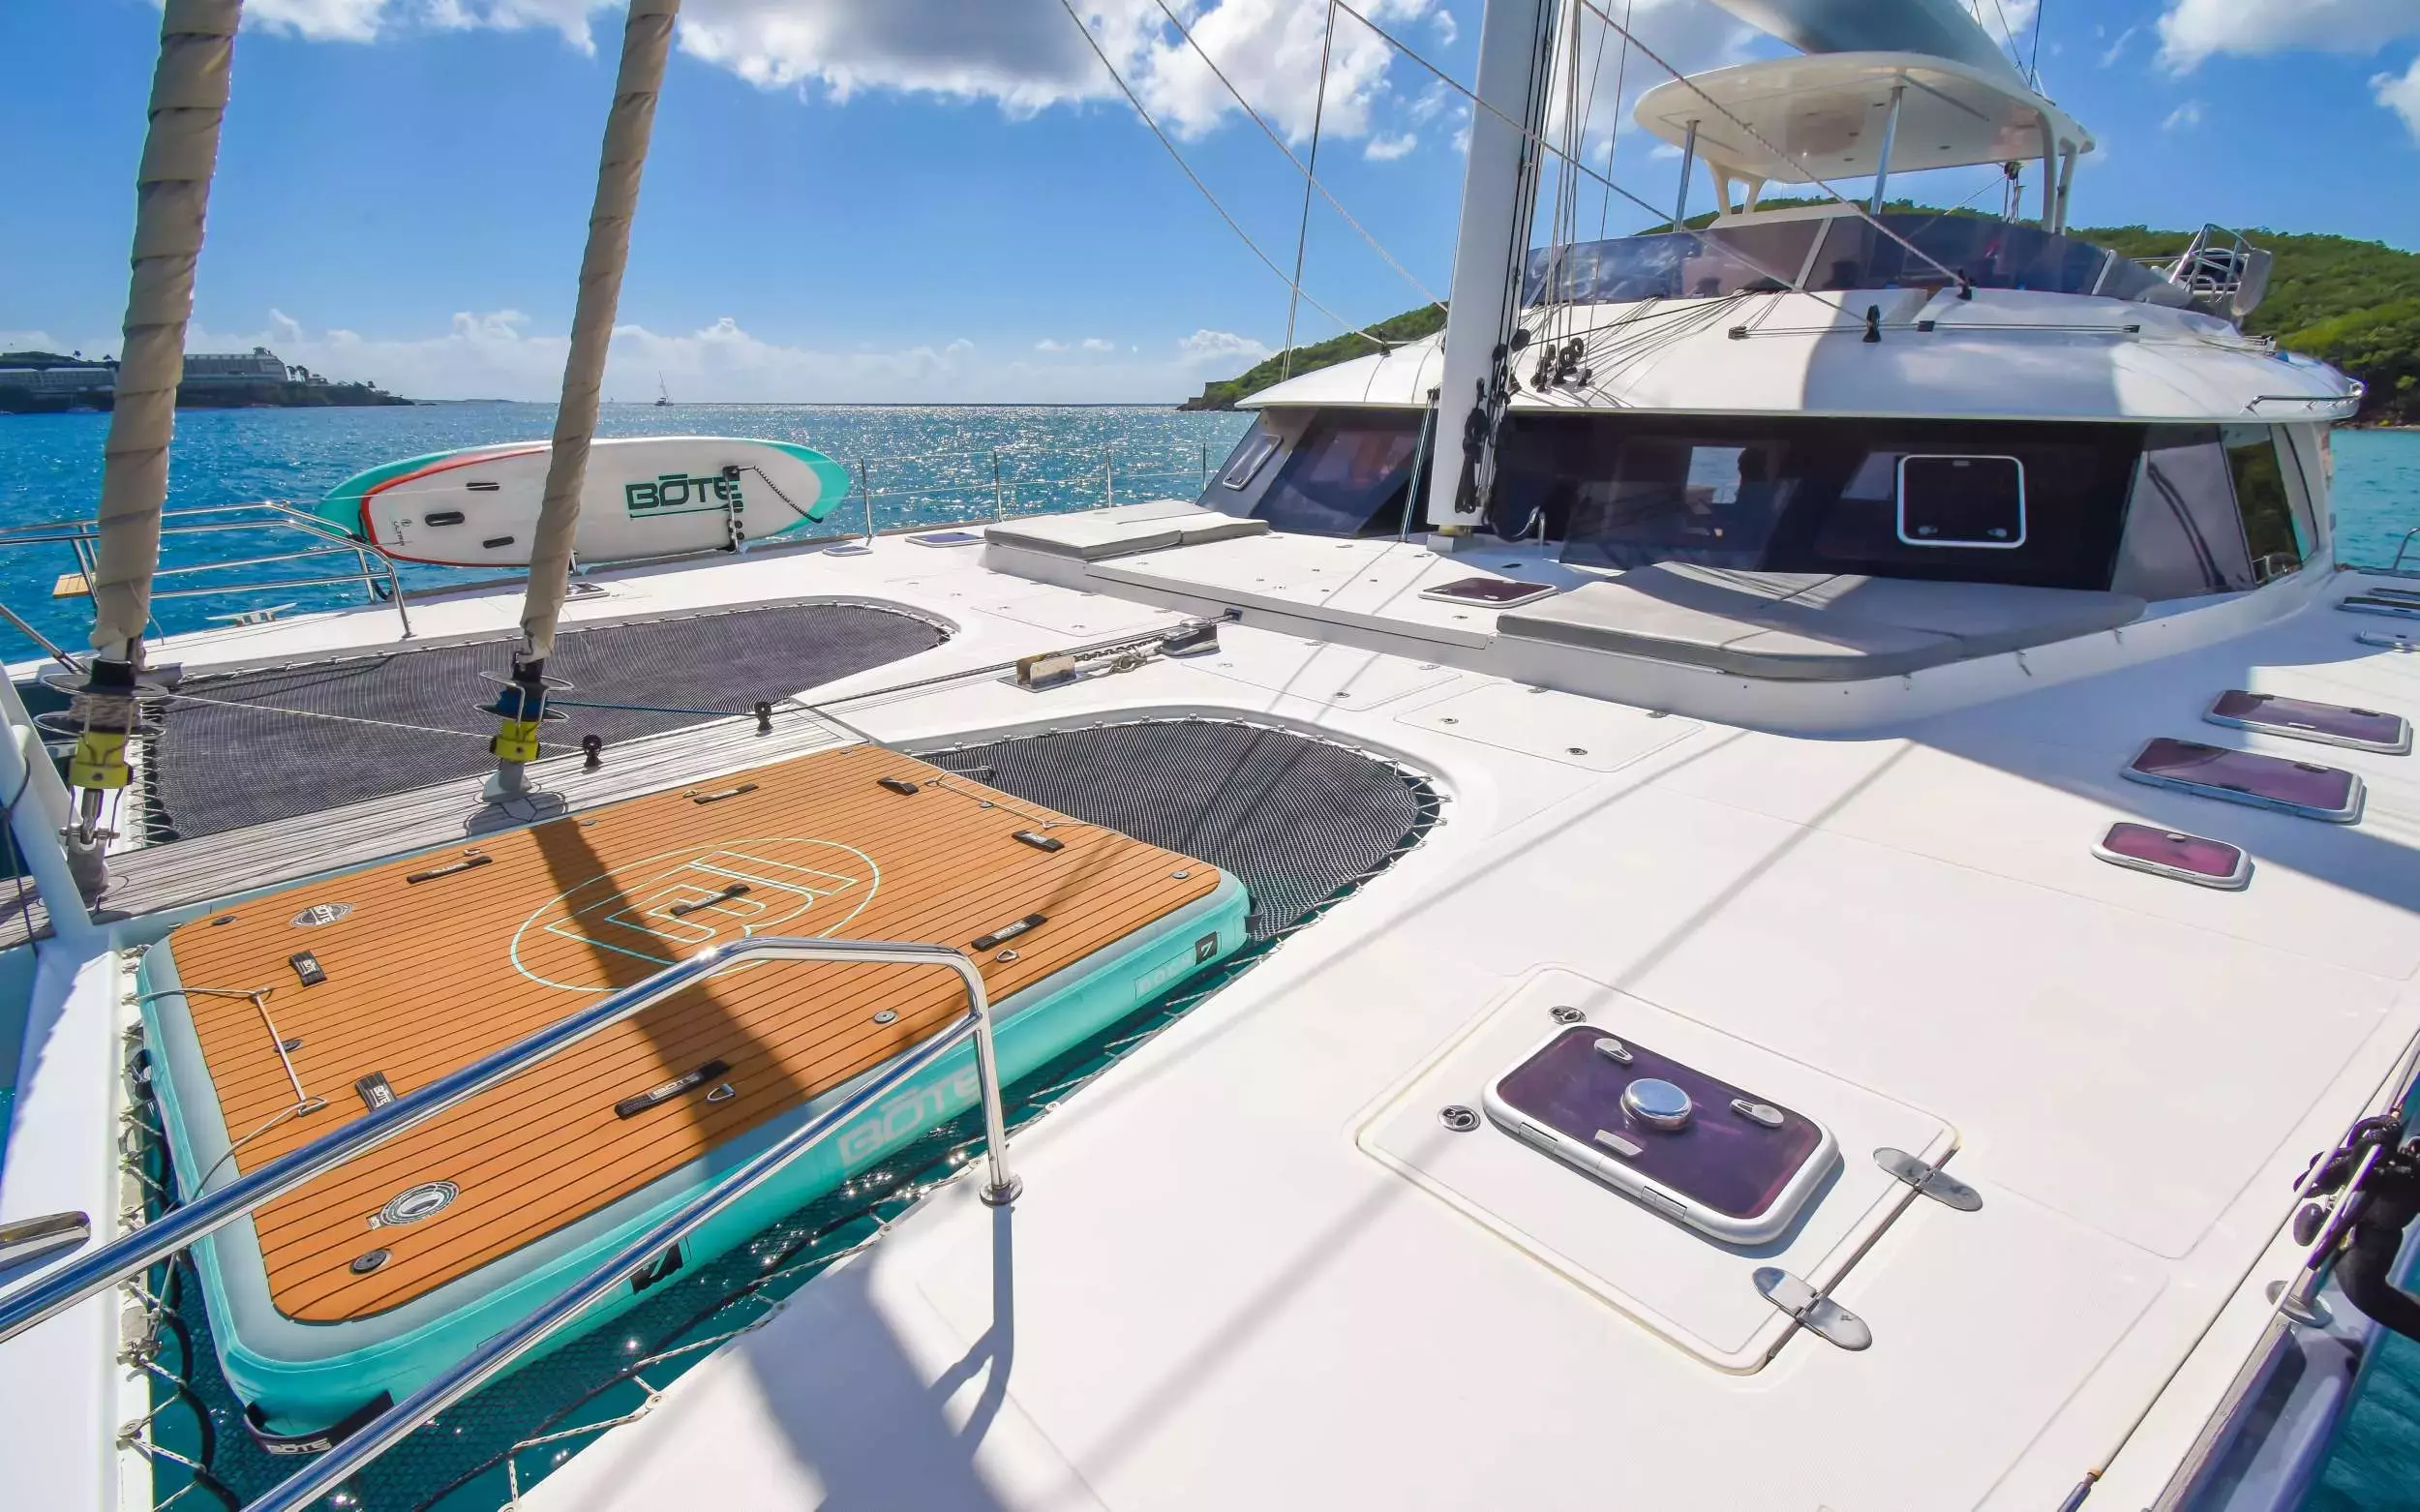 Excess by Sunreef Yachts - Special Offer for a private Luxury Catamaran Charter in Fajardo with a crew